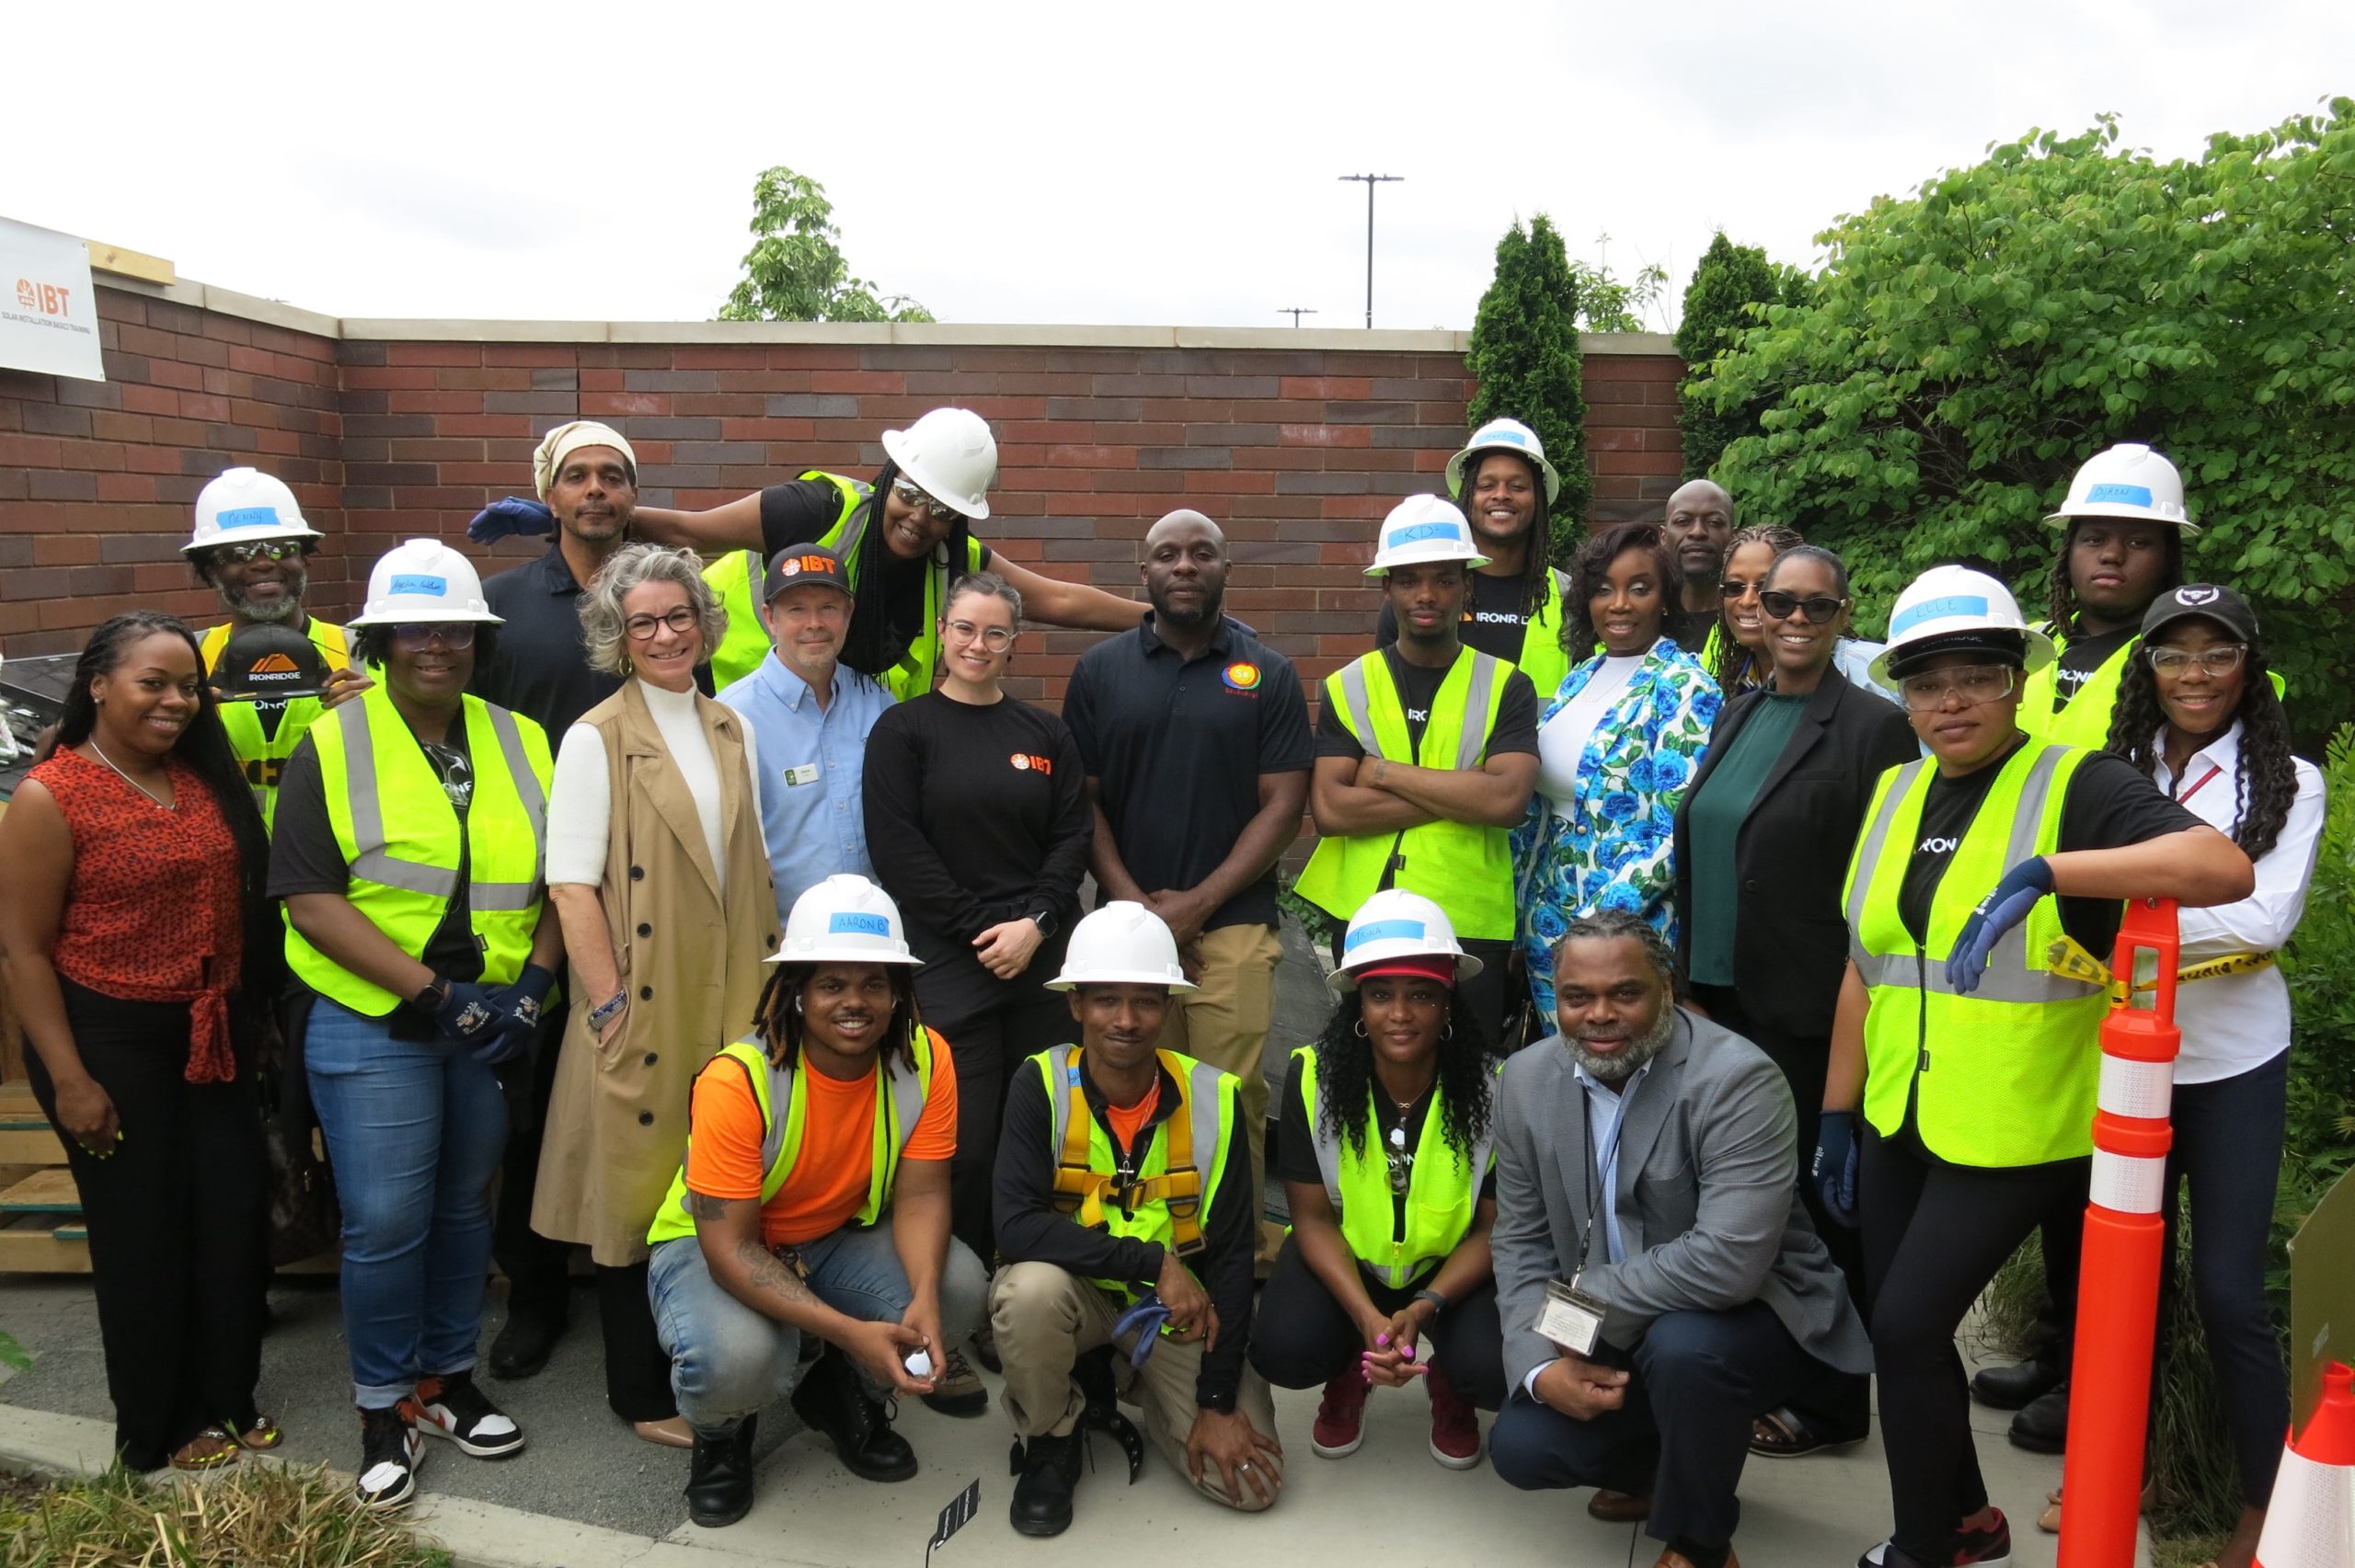 Related post: The North Lawndale Community Clean Energy Workforce Training Program